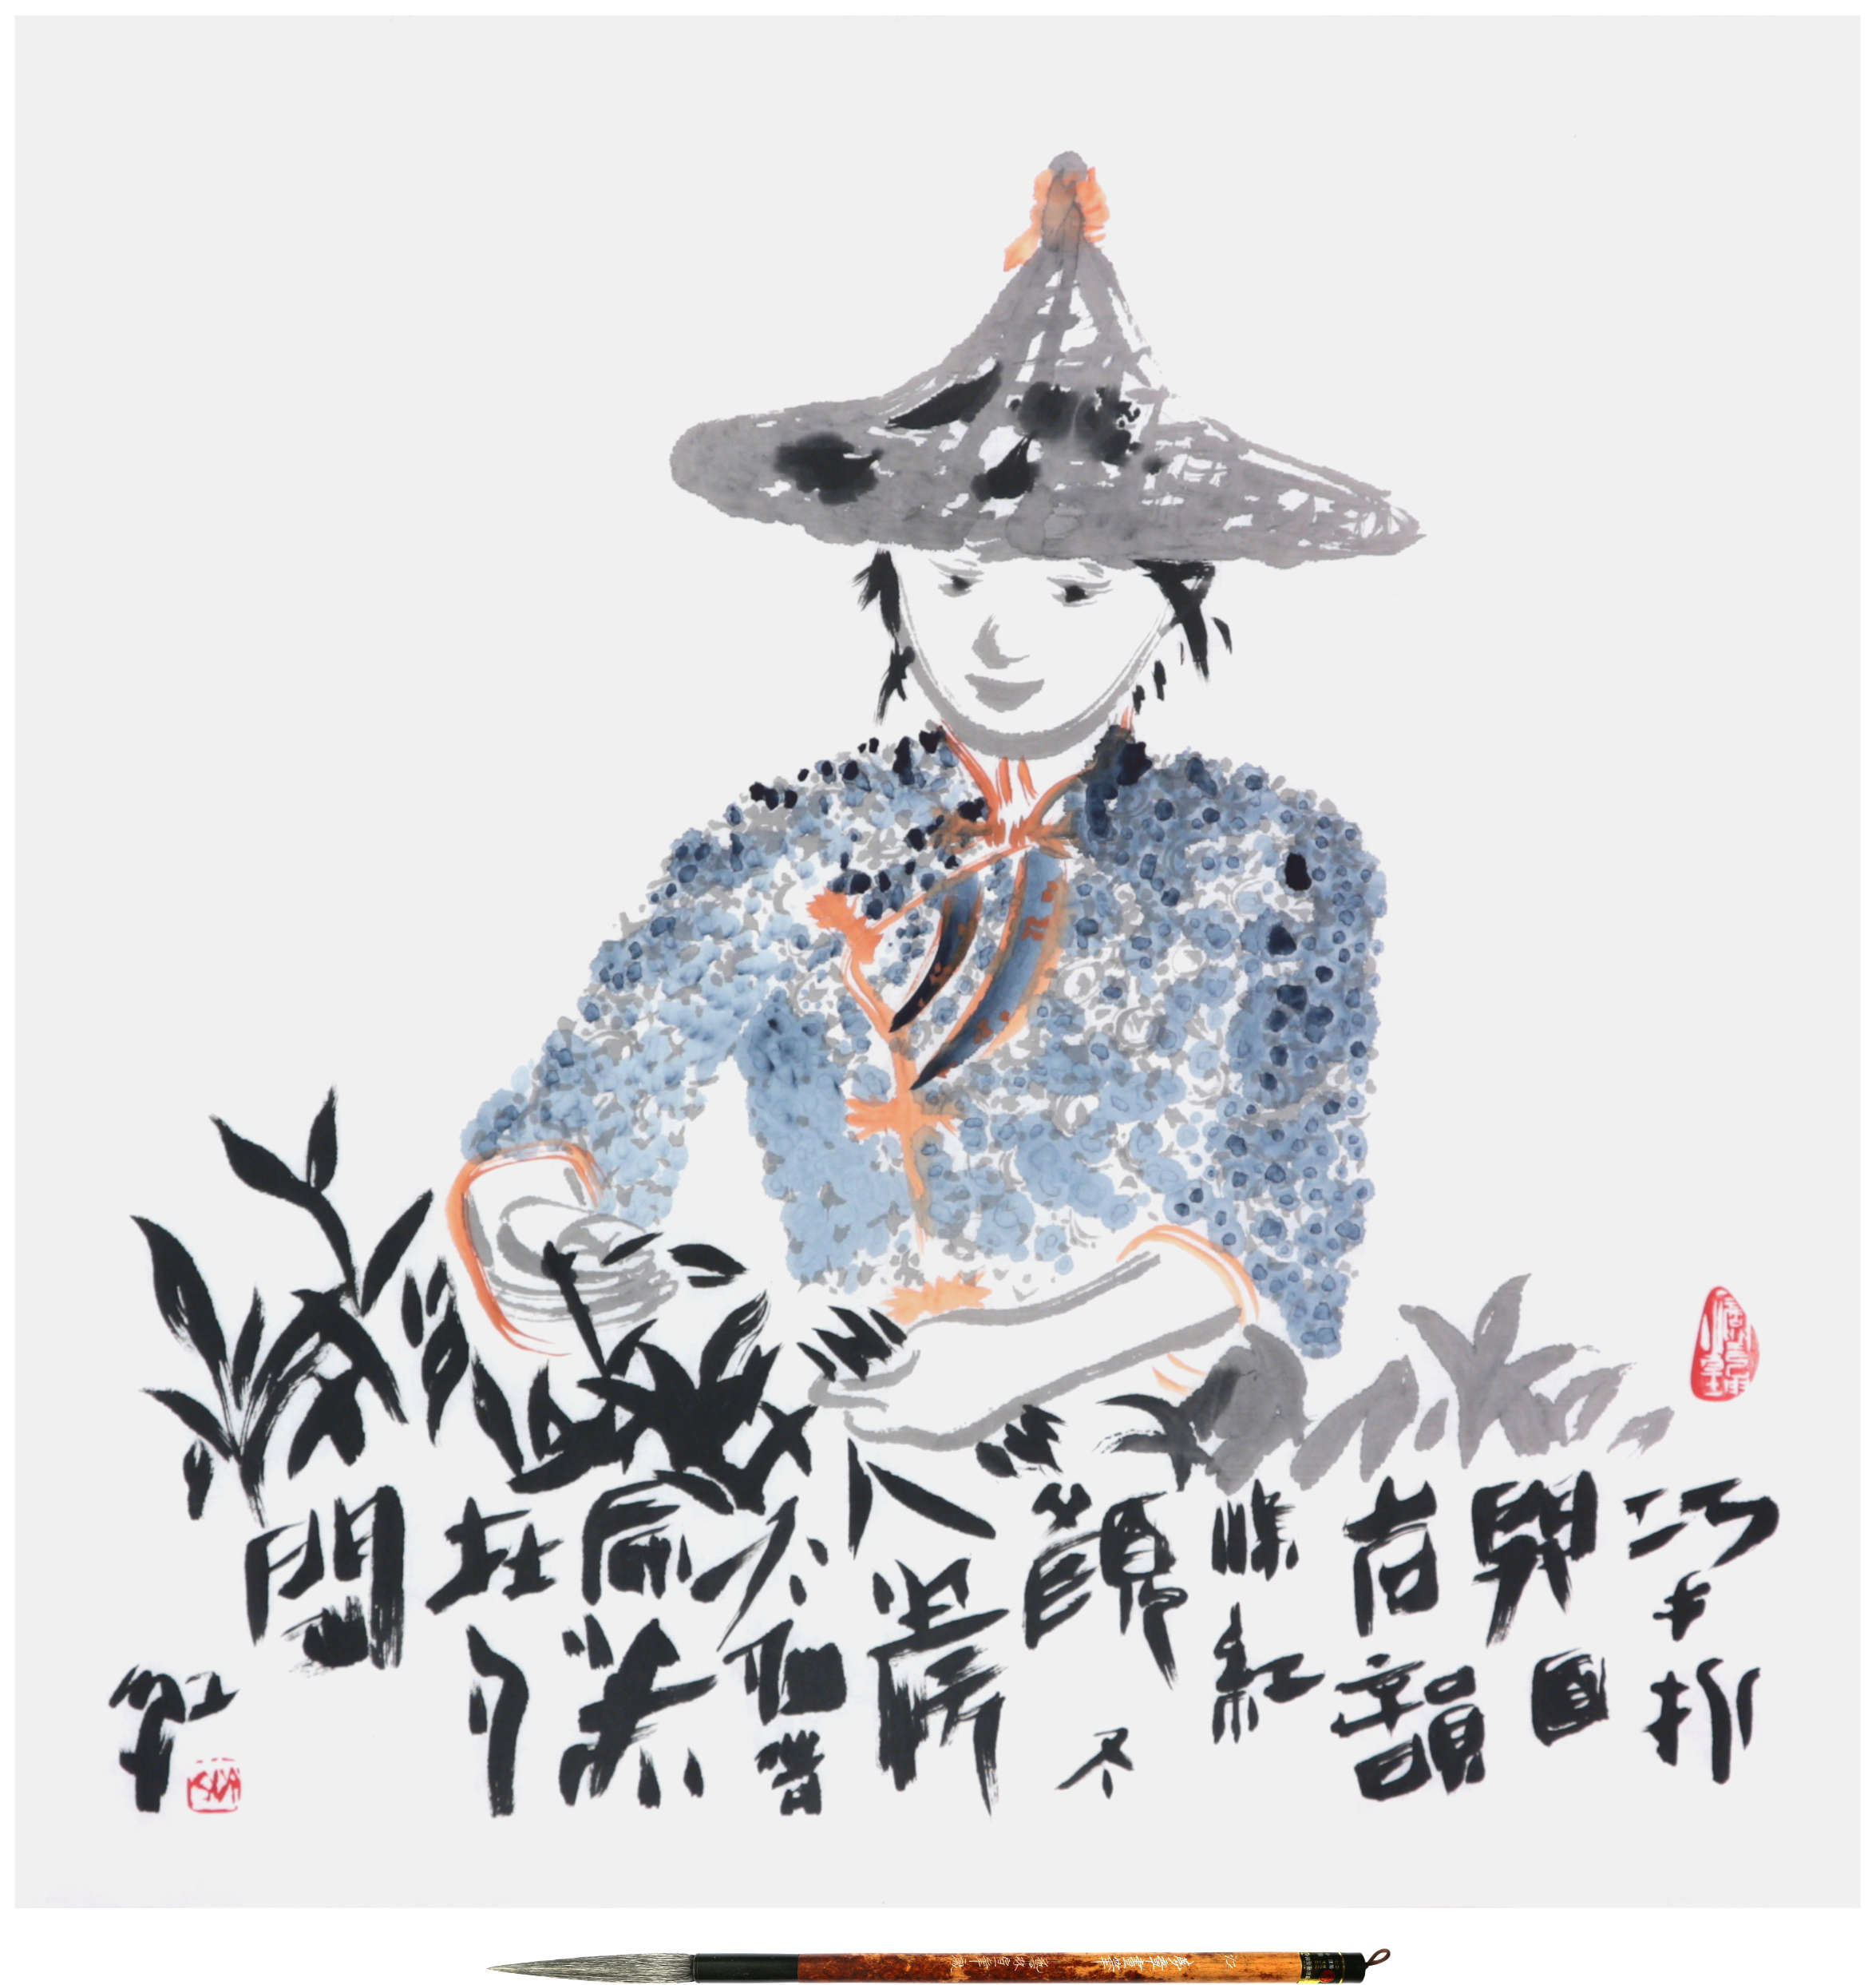 The Example of Sai Koh (Qi Hong)’s Freehand Brushwork Traditional Chinese Painting and Calligraphy on Tea: Chinese painting (figure painting, literati painting, ink wash painting), Chinese calligraphy (semi-seal script calligraphy), Chinese seal engraving (Chinese seal carving, Chinese seal cutting) - A Tea-picking Girl in Mount Wuyi - ink & color on Xuan paper, 2017 - Inscriptions: How dexterous the hands of the tea picker are. Look at rock charm reflecting on the beauty’s face. Don't envy the fairies living in the heaven since the most gorgeous still exists on earth. Koh (Hong); Chinese, 巧手折開面 嚴韻染紅顏 不羨天仙倩 最美在人間 紅 - Seal: Sai (Qi); Chinese, 齊 A Drop of Water Moistens the Universe; Chinese, 一滴潤乾坤 -   Xuan Paper: Mian Liao Mian Lian, 69×68cm - Brush: Goat Hair Long Head Brush, Meng Zhang Hua Bi · Jiang